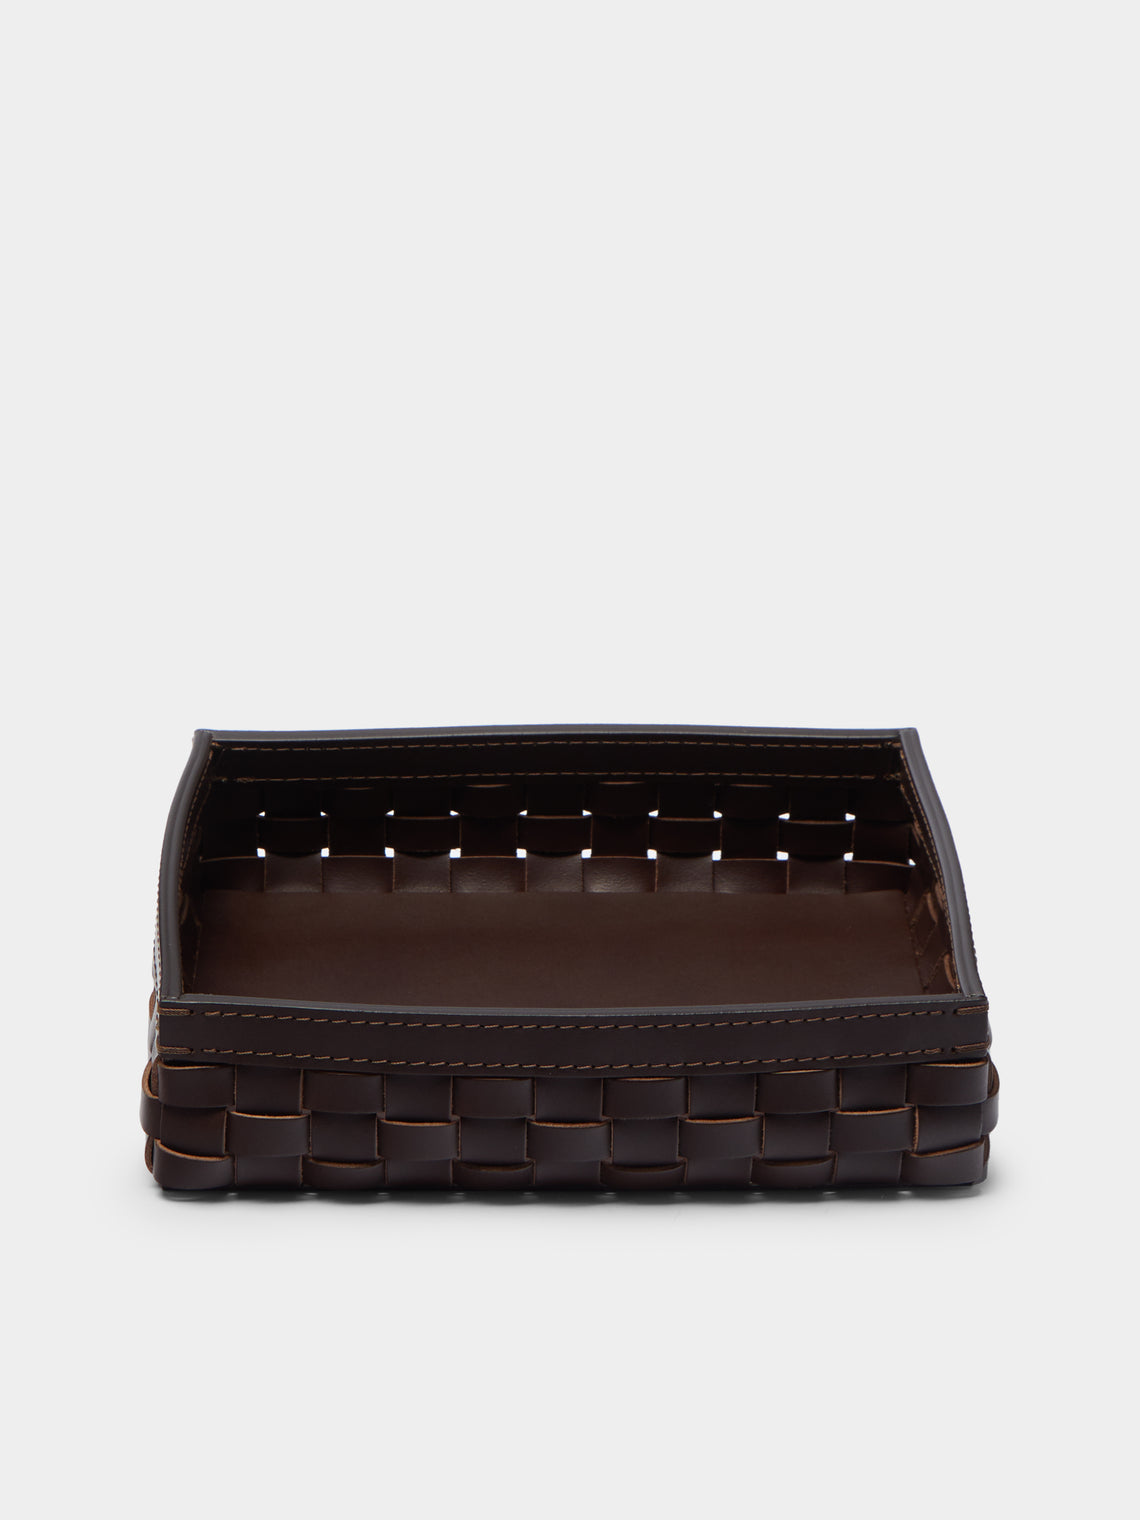 Riviere - Woven Leather Tray -  - ABASK - 